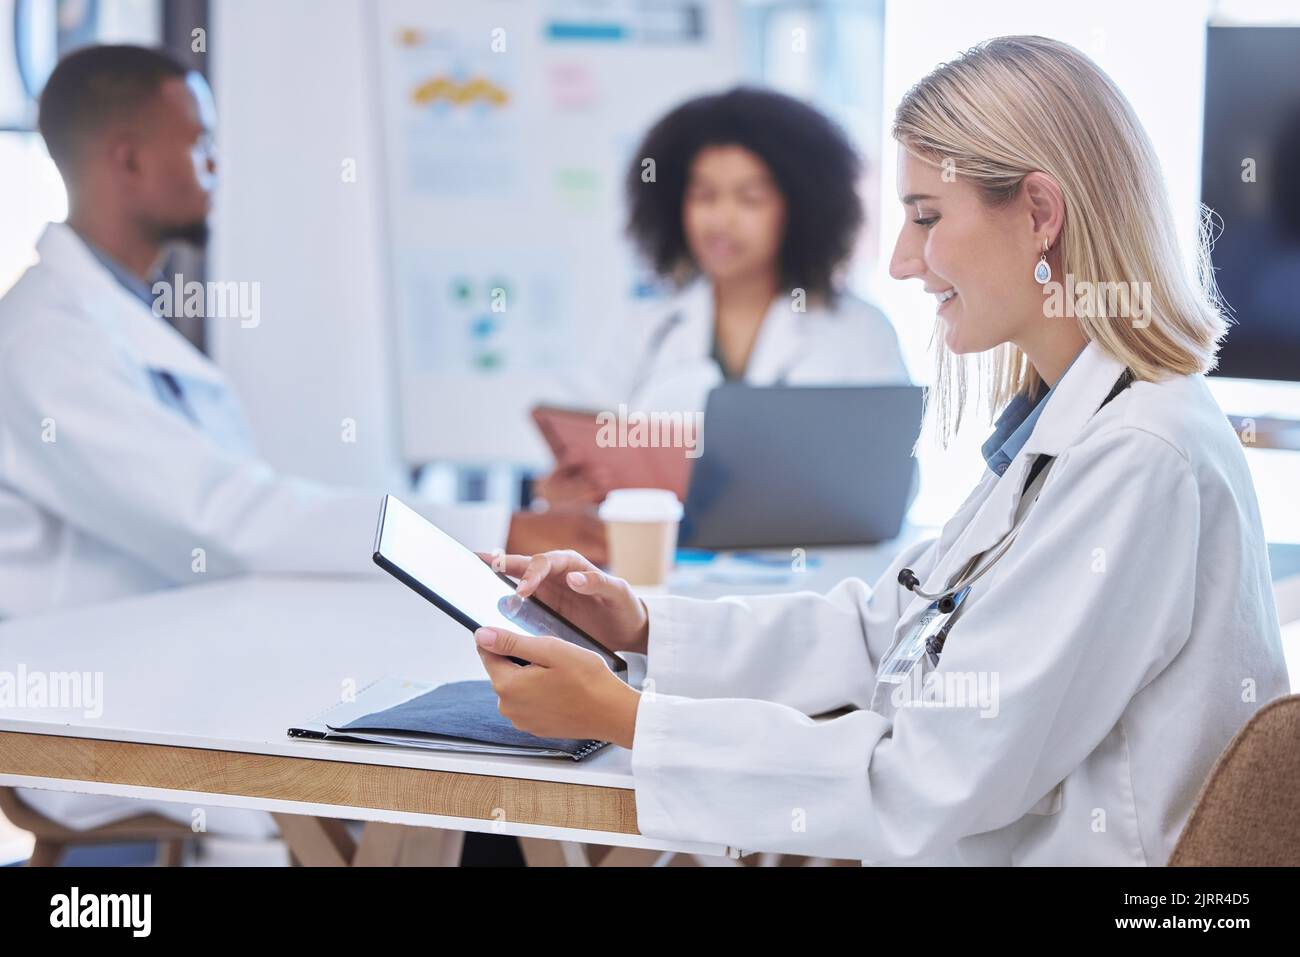 Teamwork, innovation and doctors working on digital tablet in a meeting or conference, reading and research together. Health care workers Stock Photo